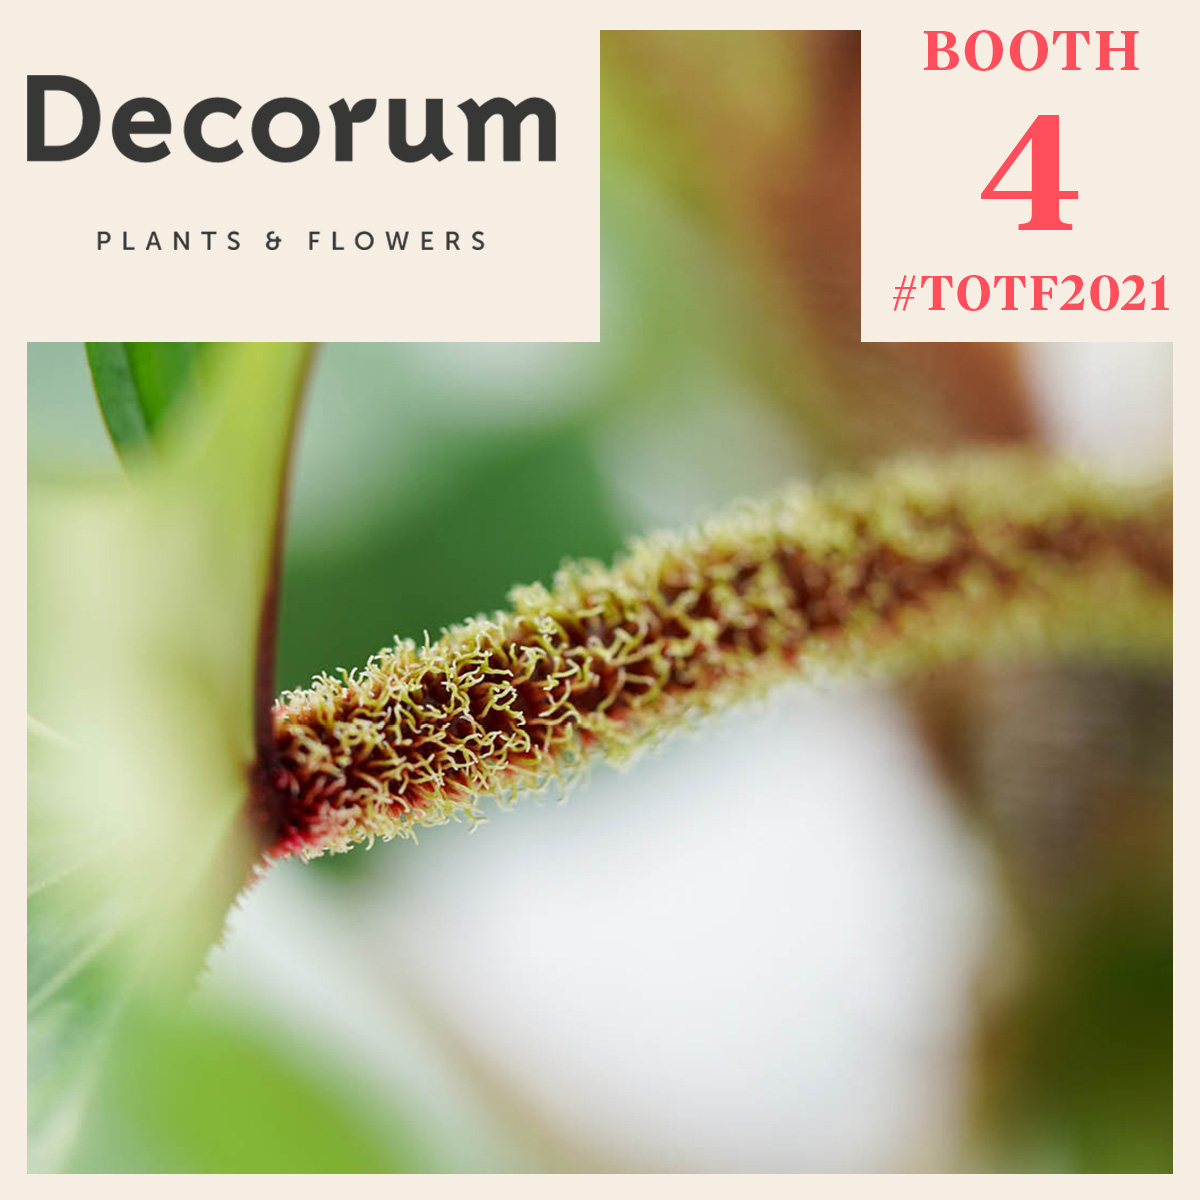 decorum-launches-new-corporate-identity-pure-perfection-featured